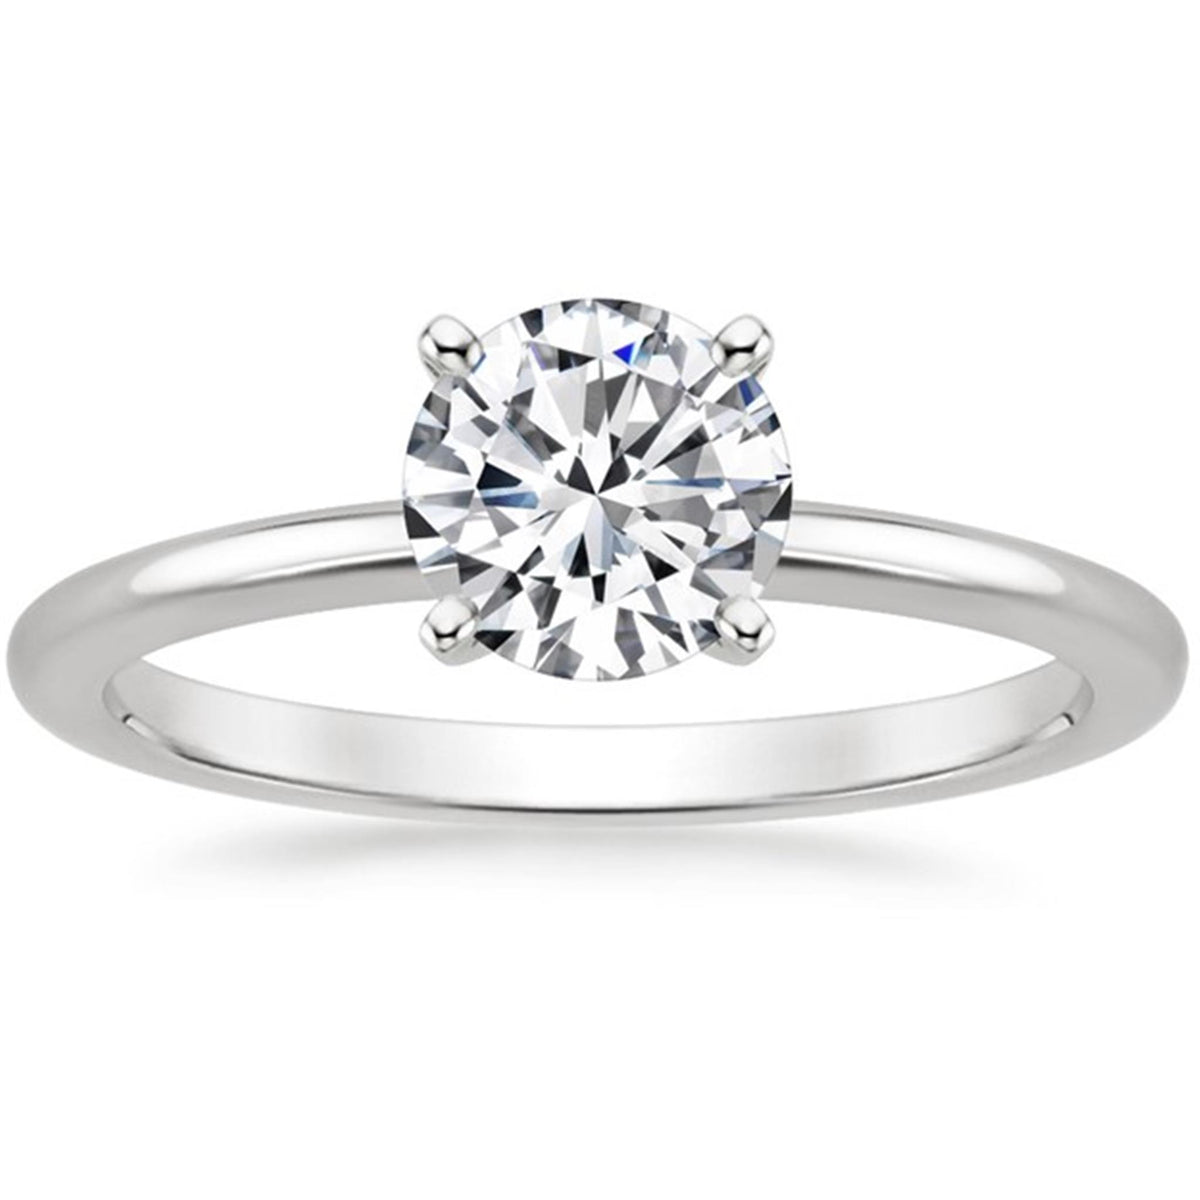 14Kt White Gold Solitaire Solitaire Ring With 1.00ct Lab-Grown Center Diamond